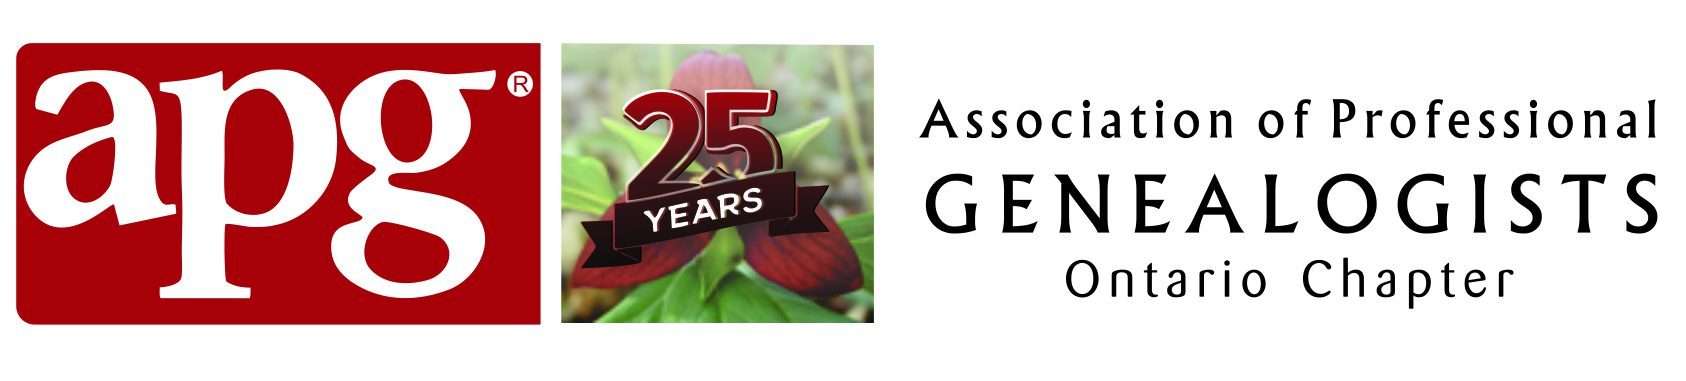 Ontario Chapter Association of Professional Genealogists